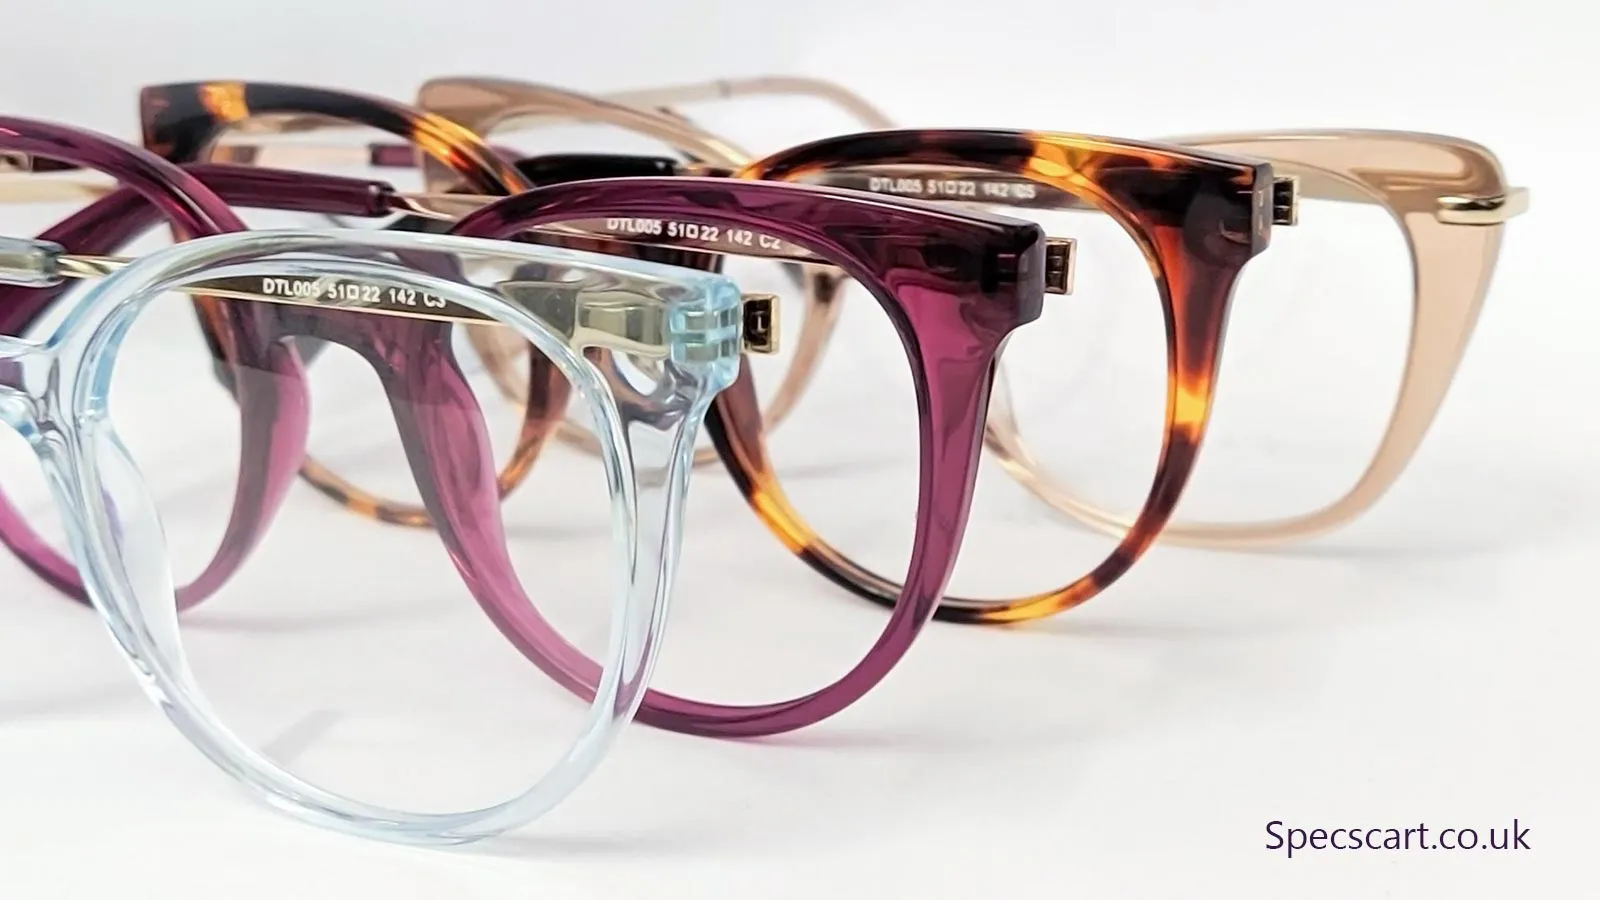 10 Tantalising Types of Glasses That Can Pull Eyes For You!